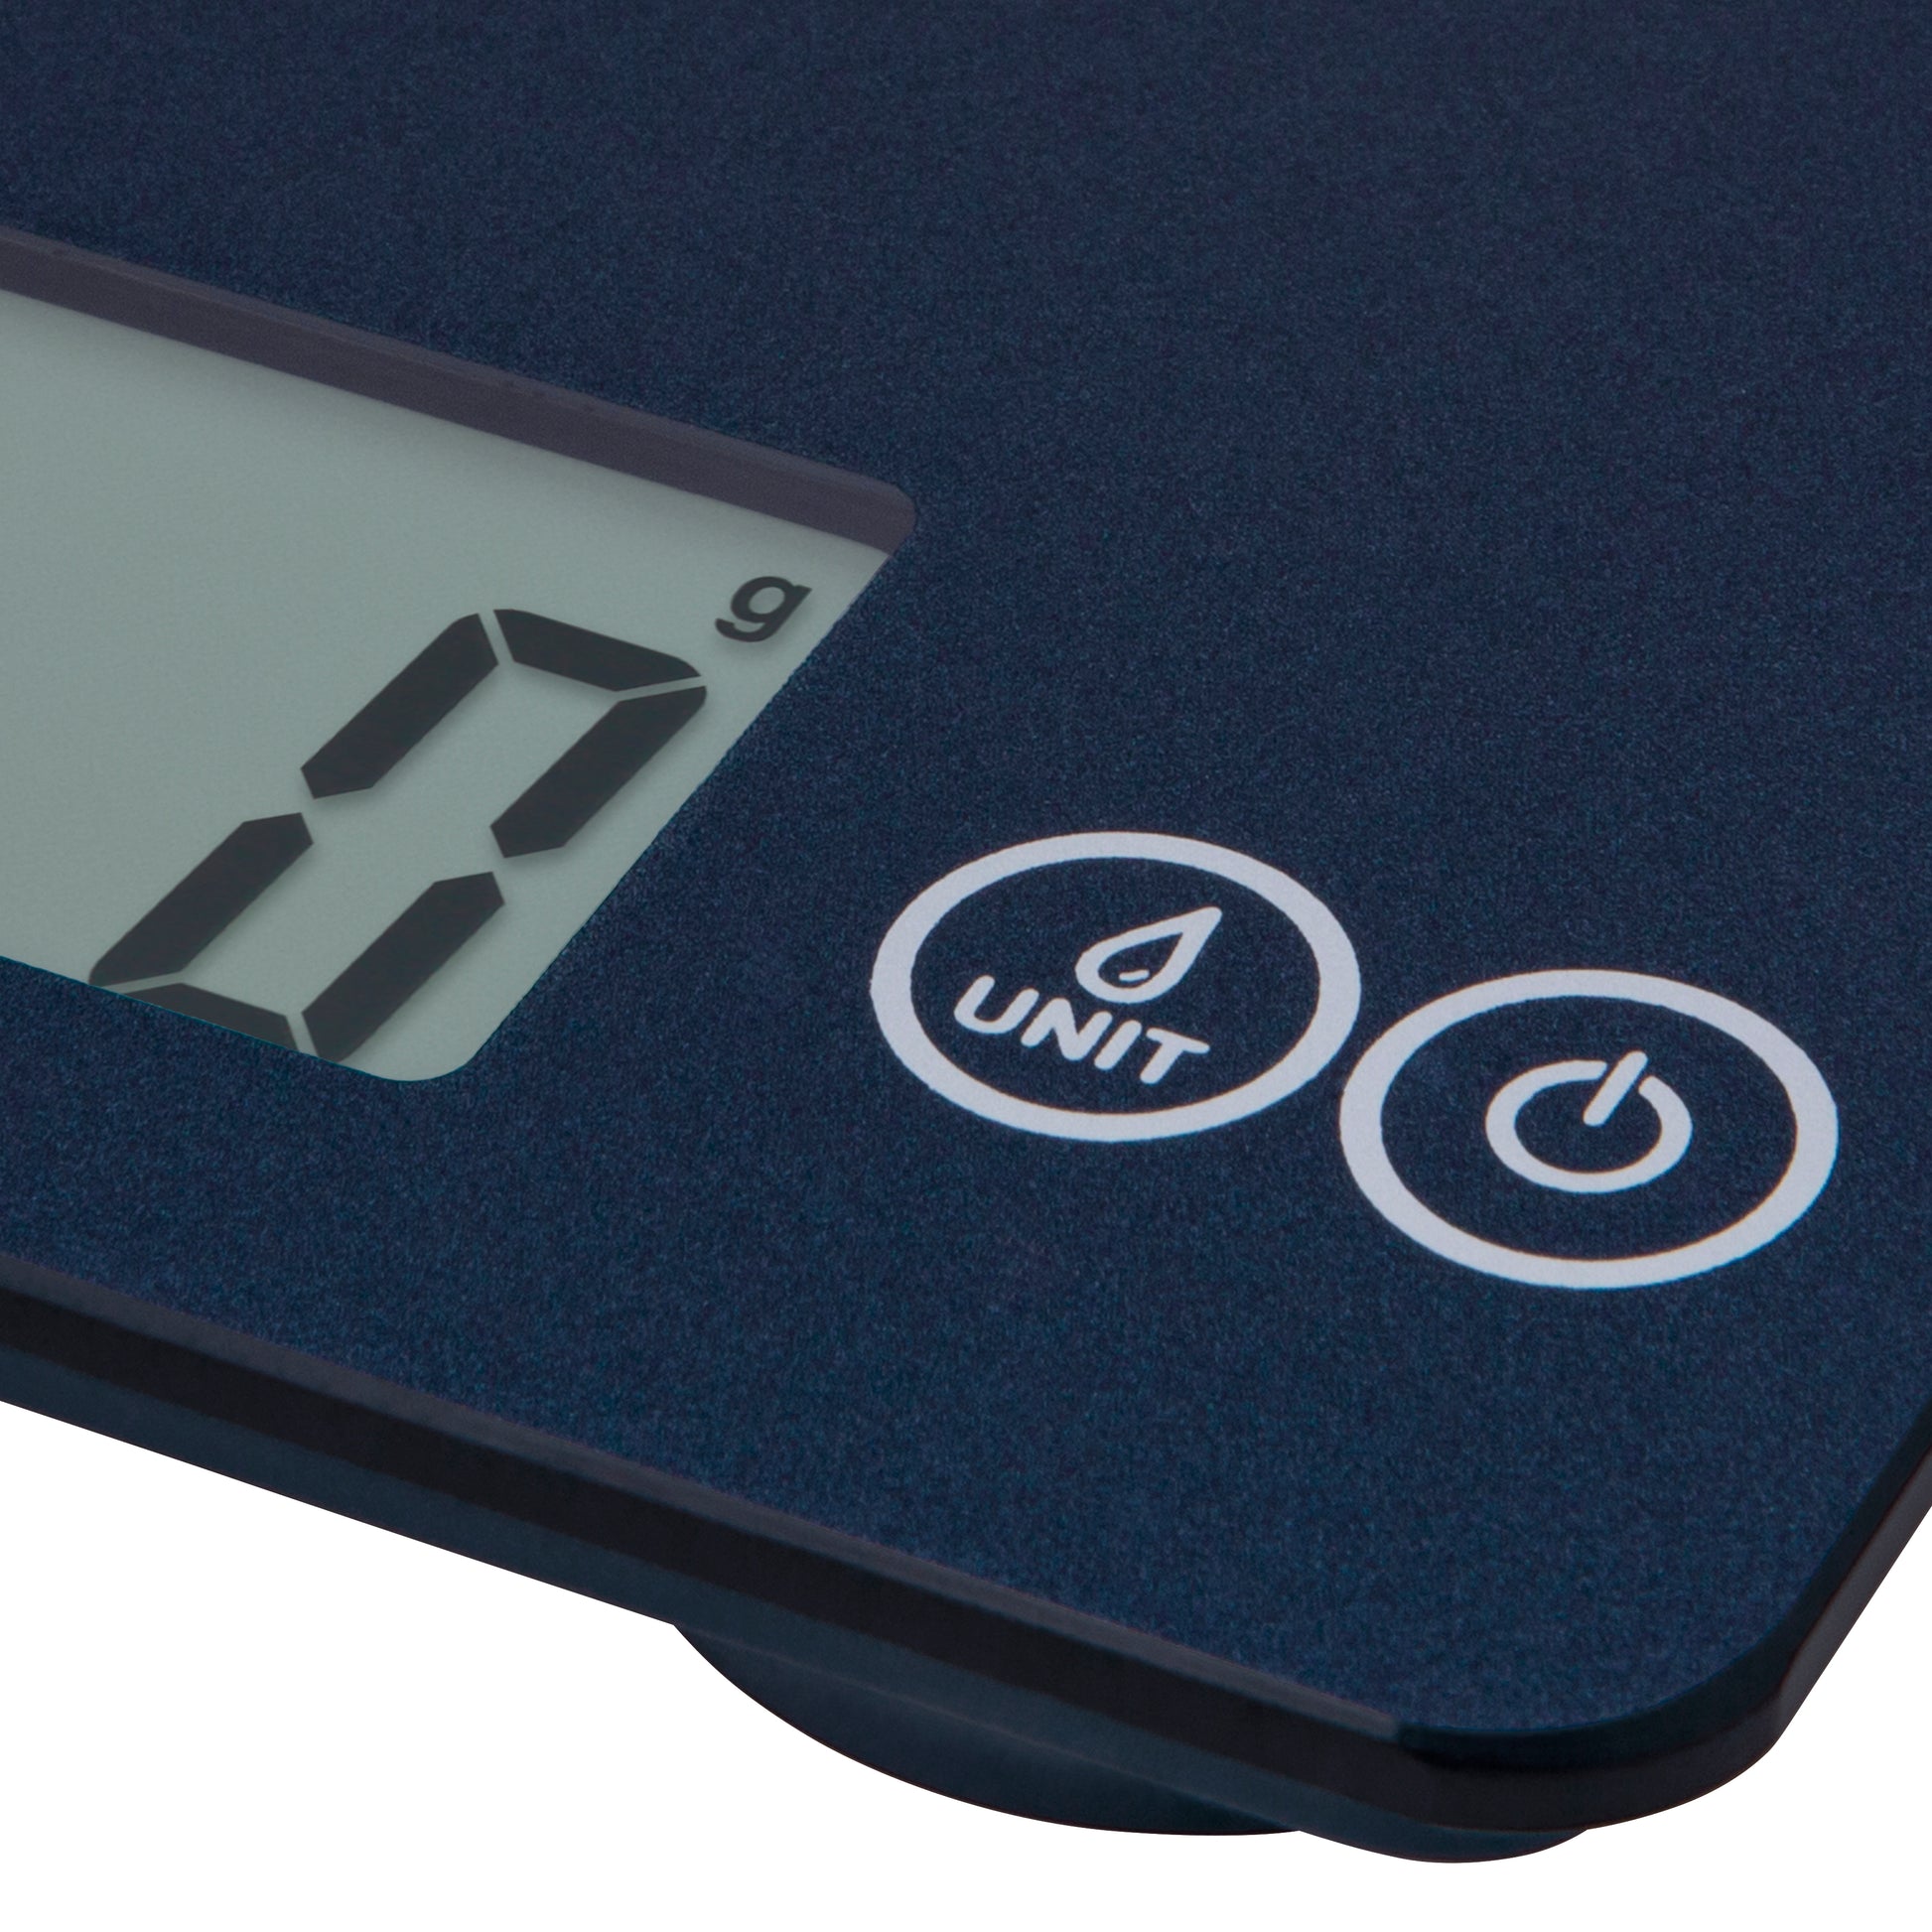 Digital kitchen scales - Consumer scales